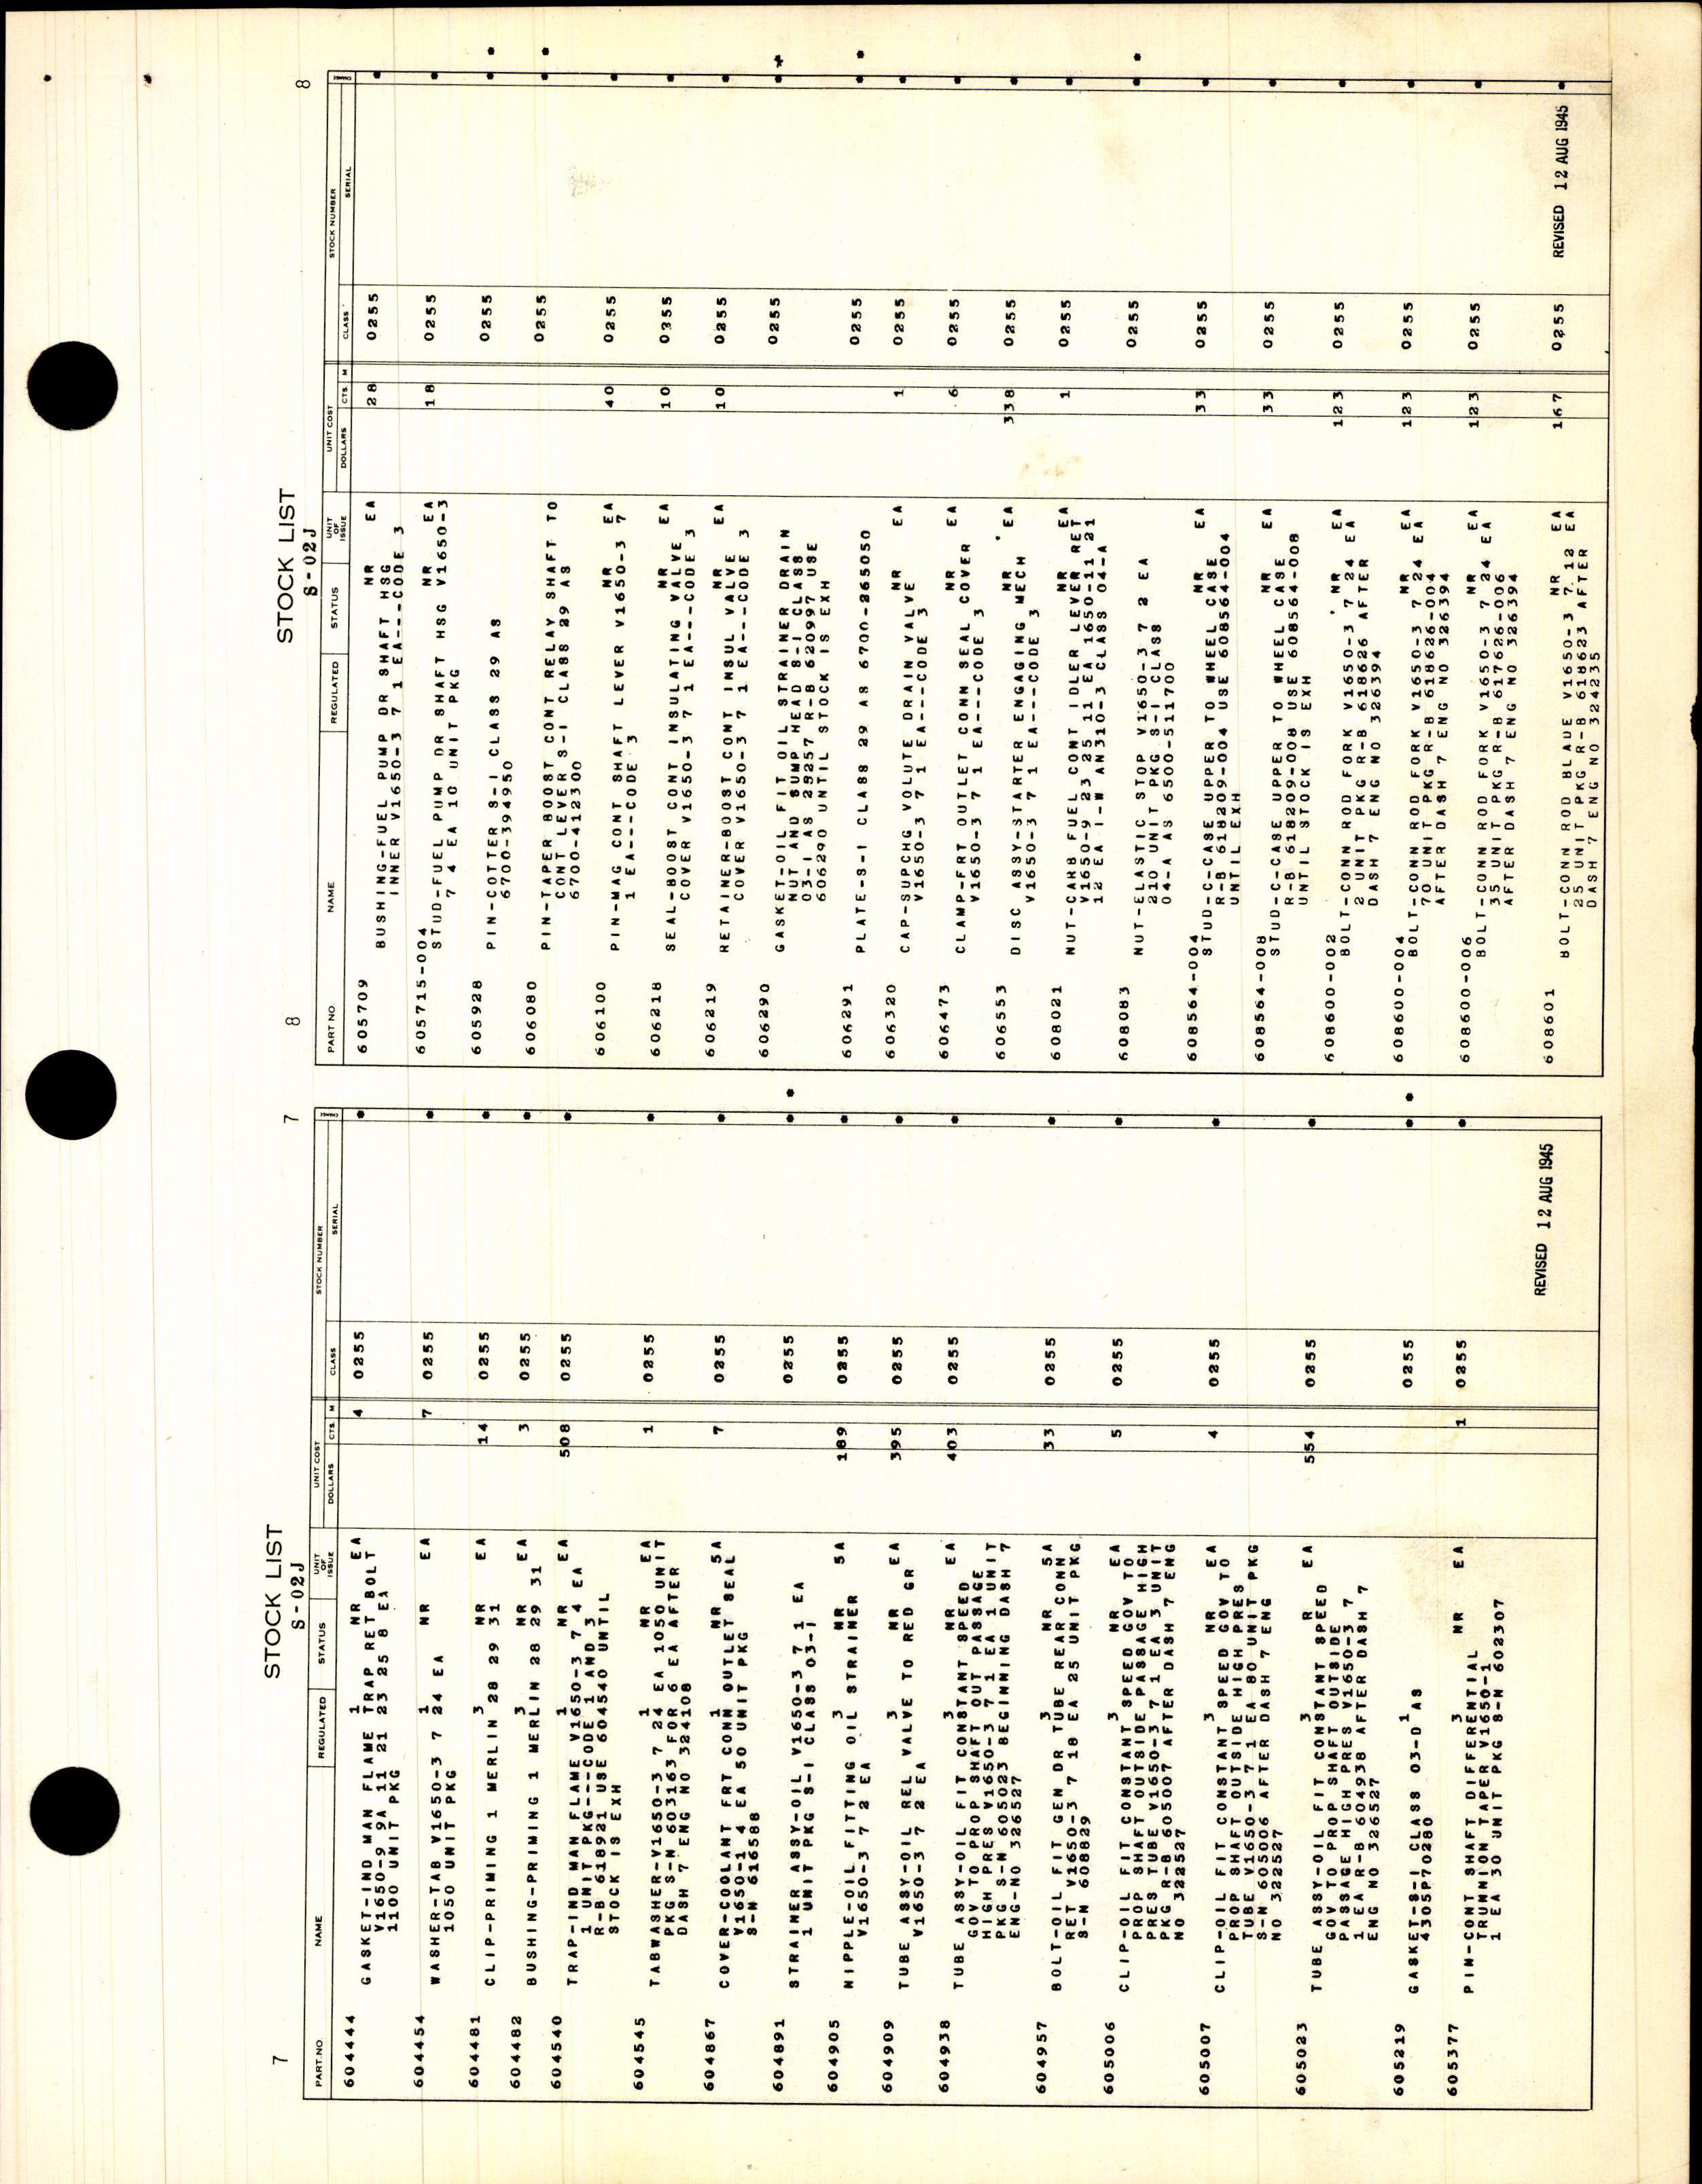 Sample page 7 from AirCorps Library document: Stock List Parts for Rolls-Royce Engines